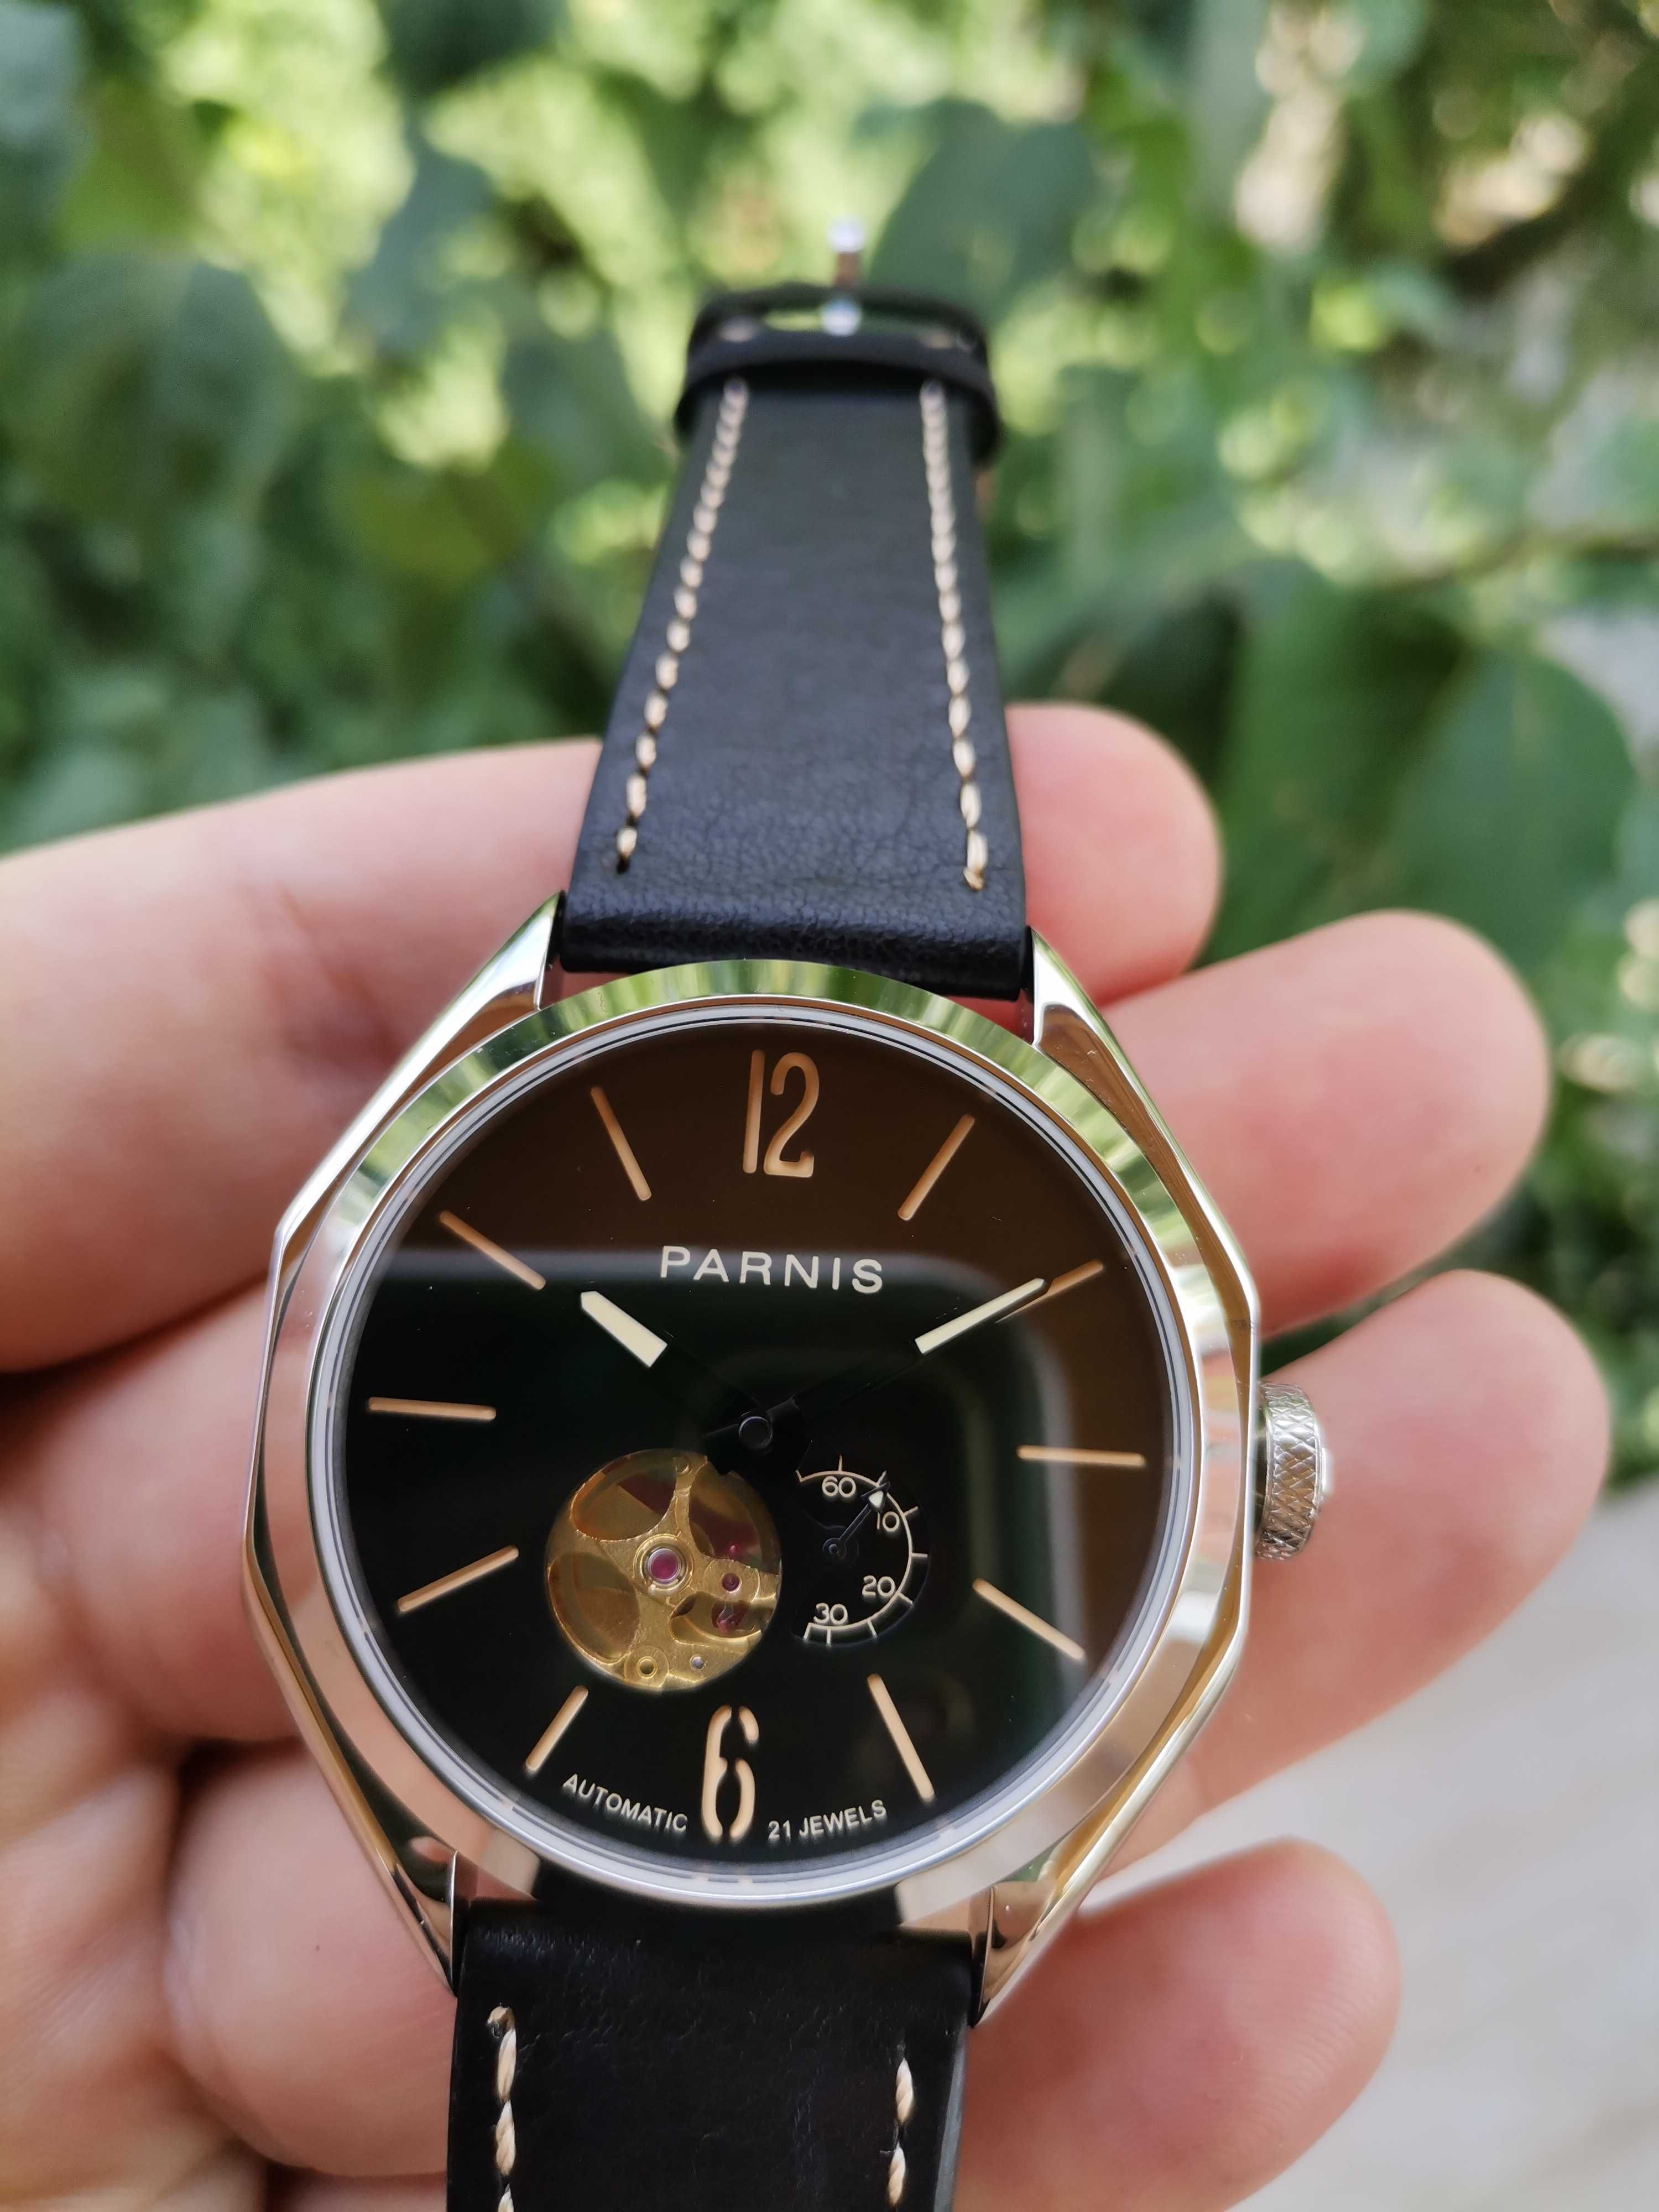 Parnis Silver Automatic 43 mm